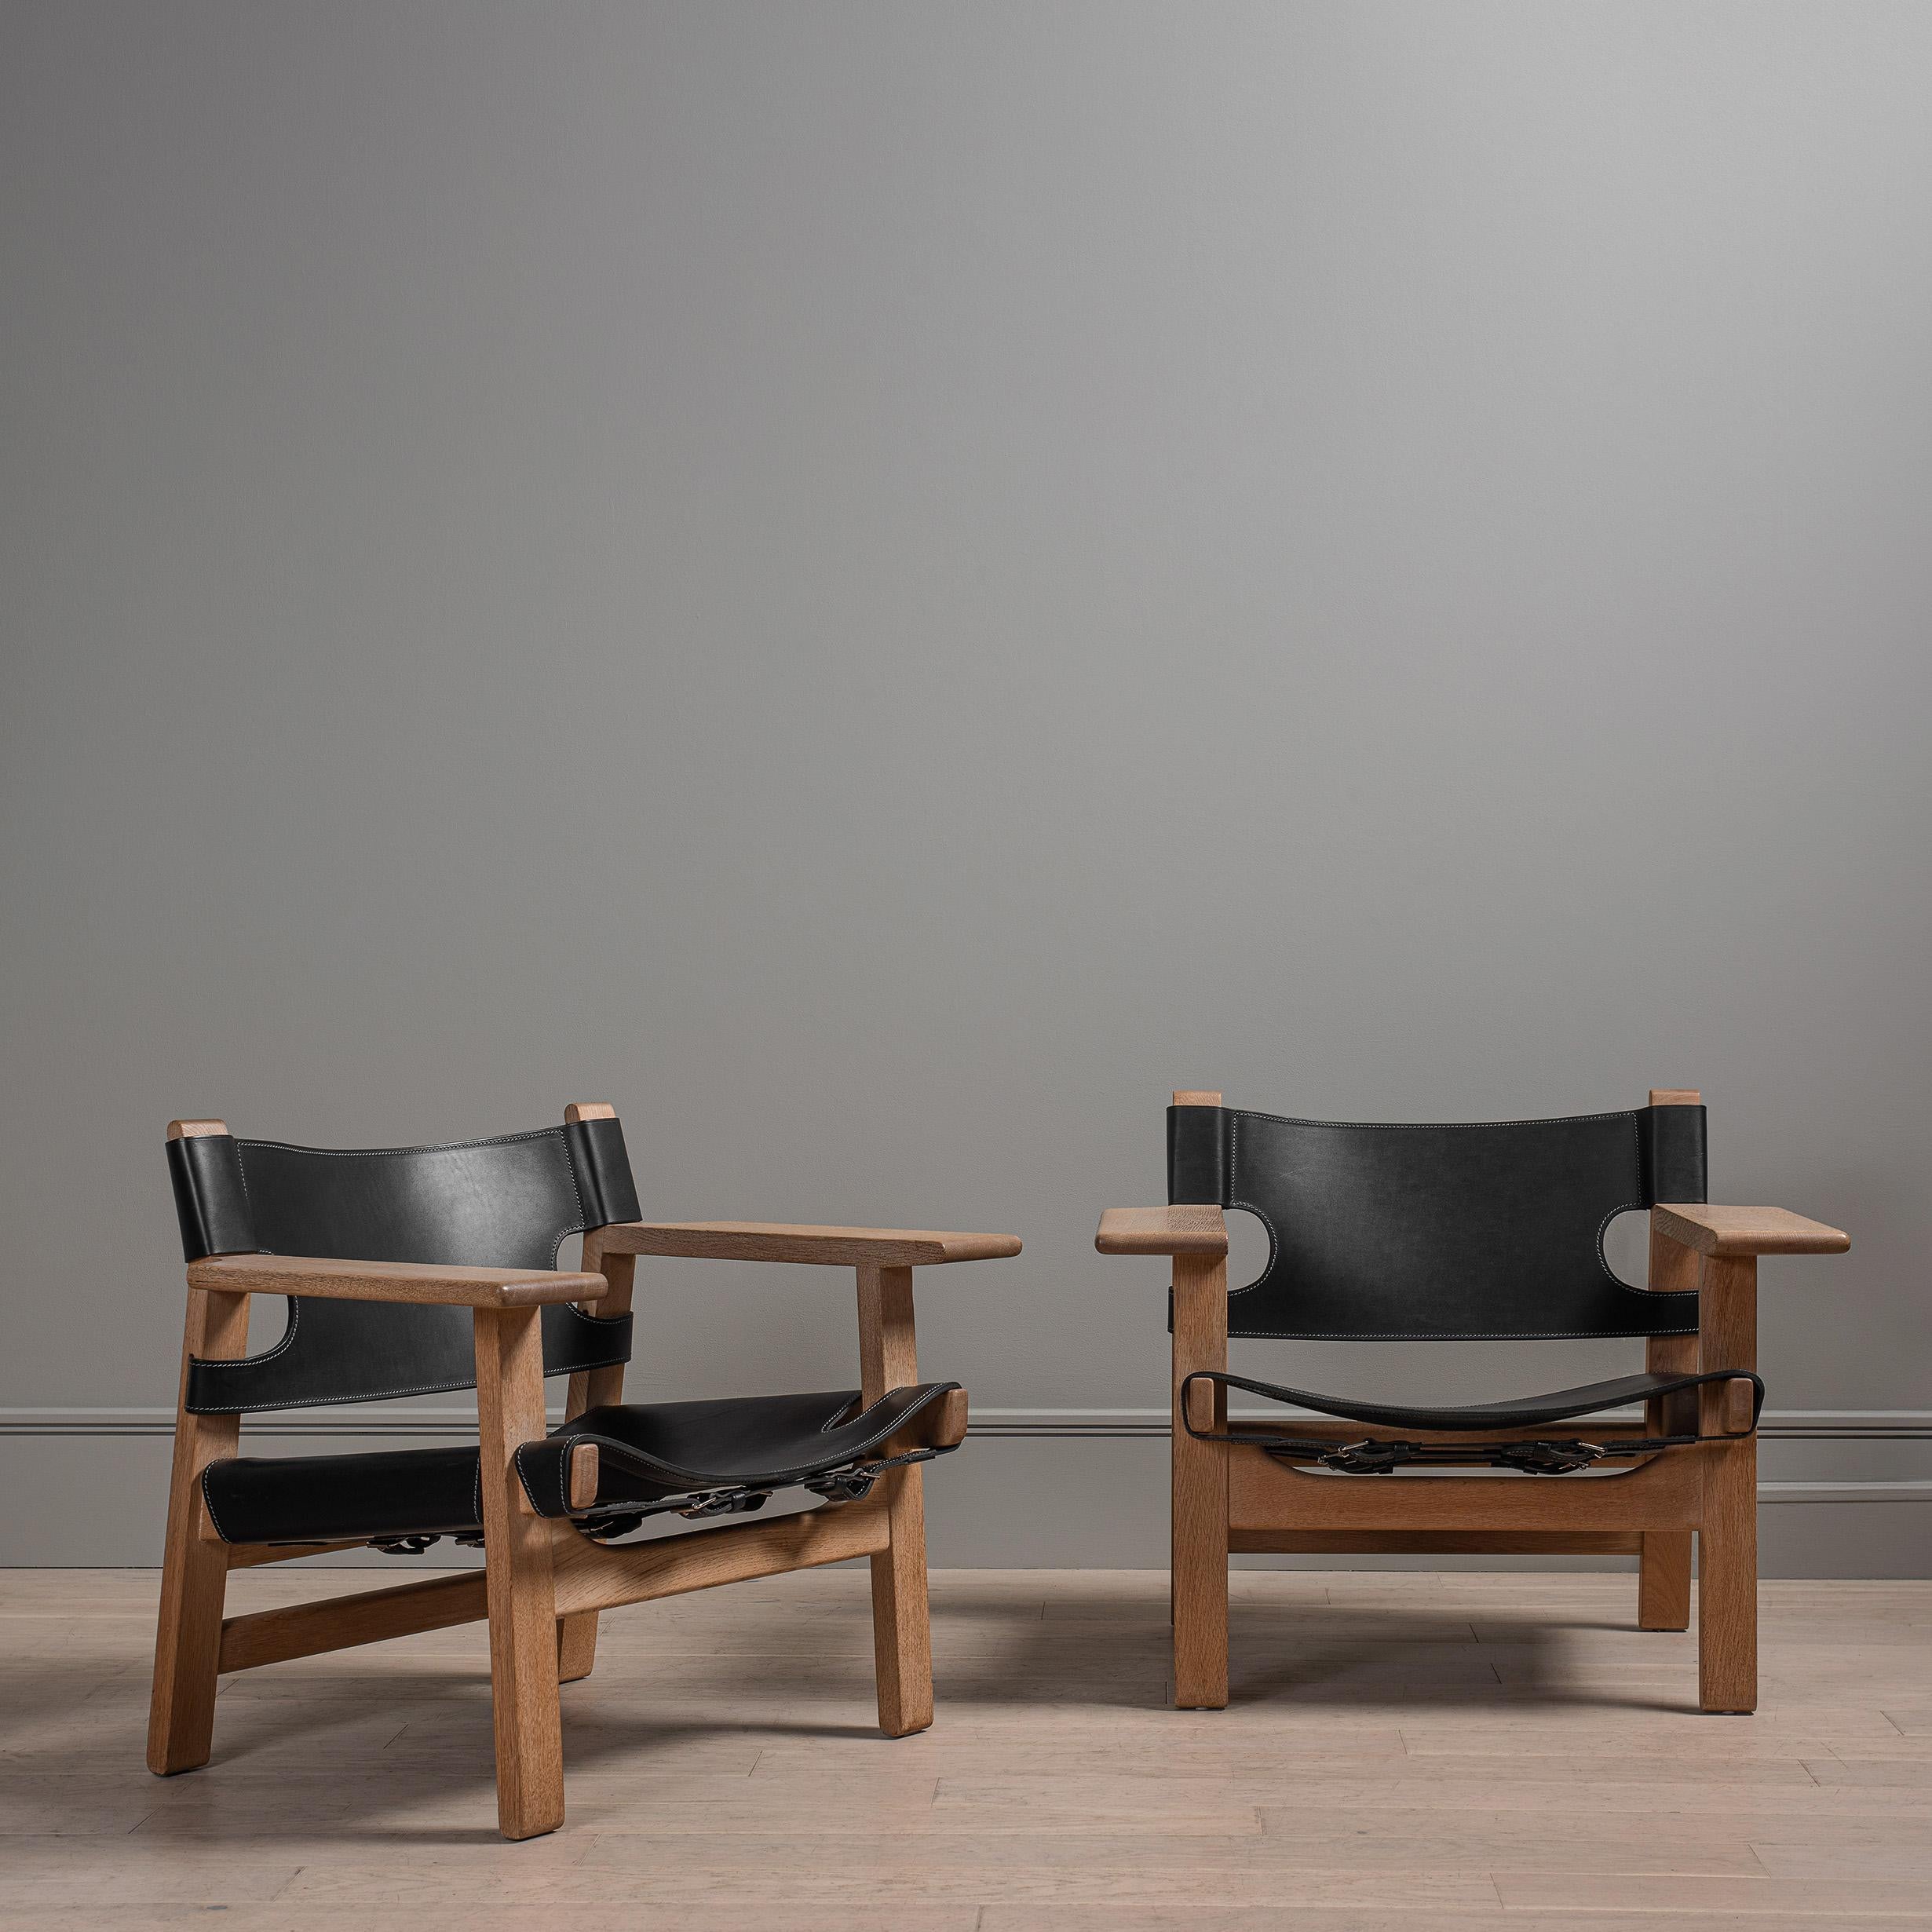 A perfectly matching pair of the 'Spanish' chair by Borge Mogensen 1958, model 2226. One of his greatest and widely acclaimed designs. These are the earlier original versions from the Fredericia manufacturers, discernible by the frame construction.